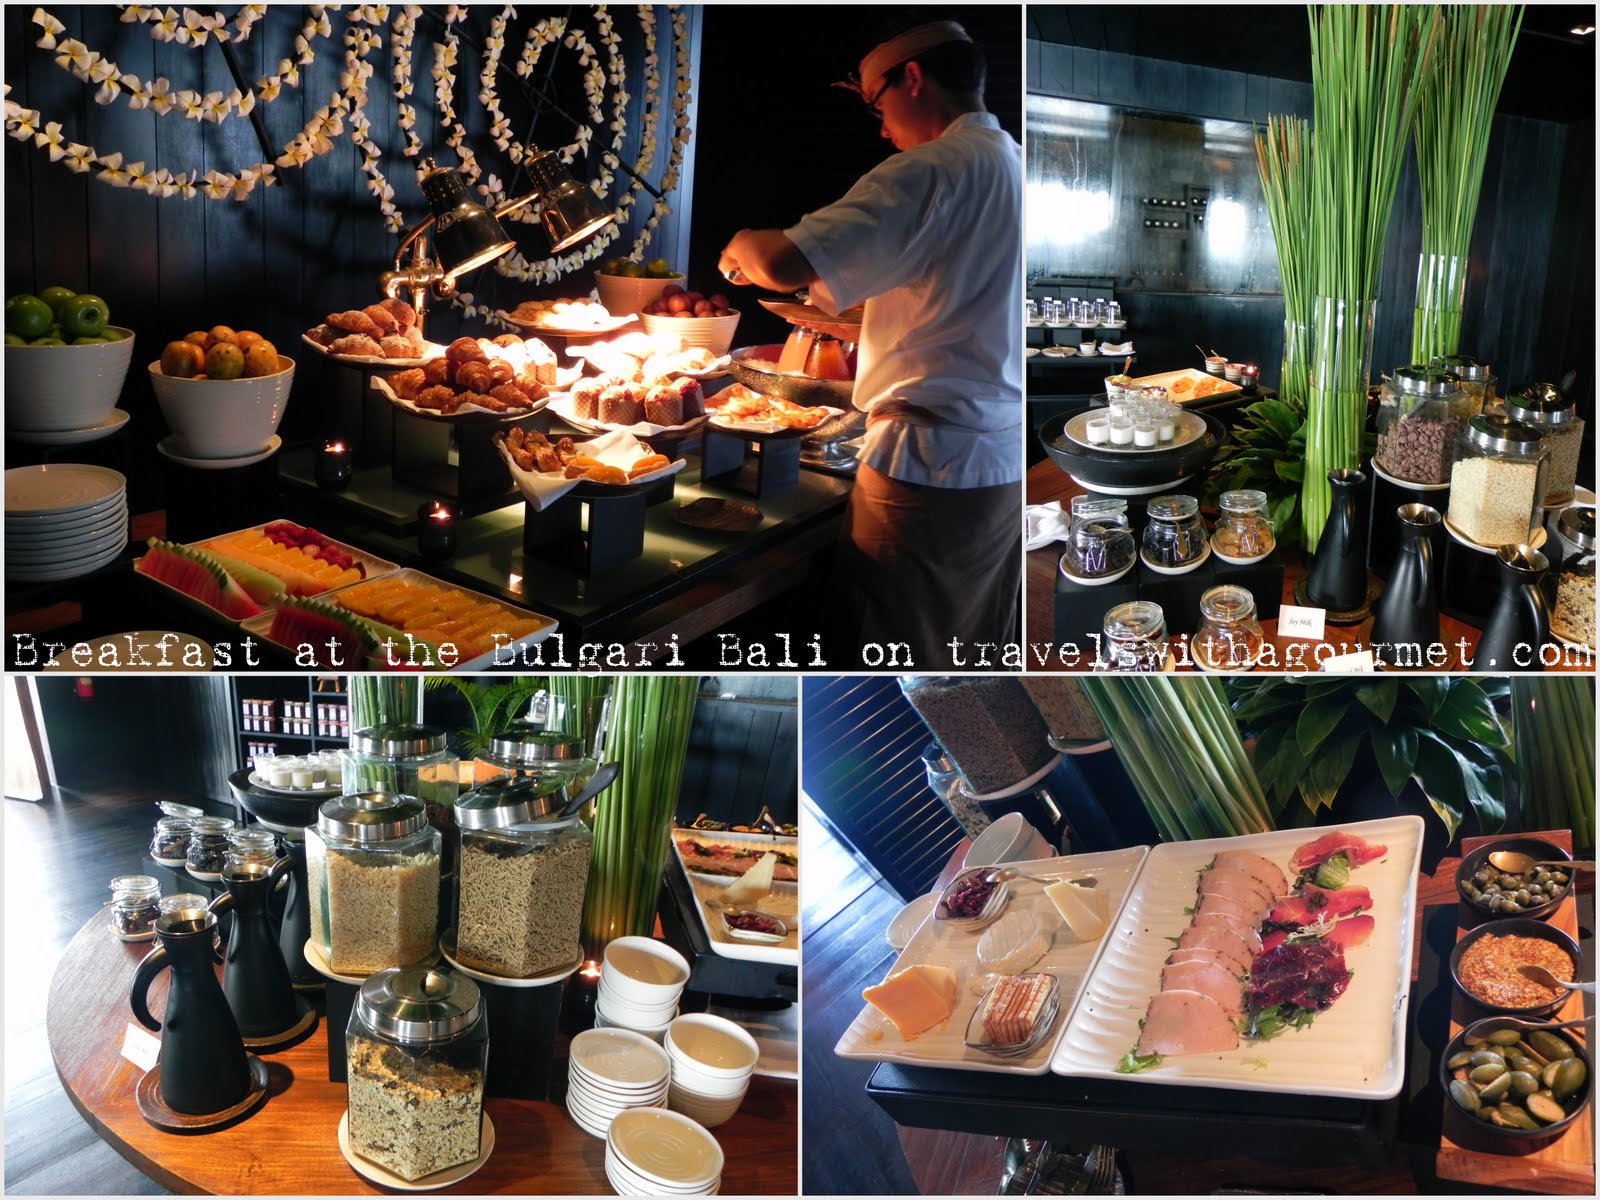 Travels with a Gourmet: Another Bali breakfast